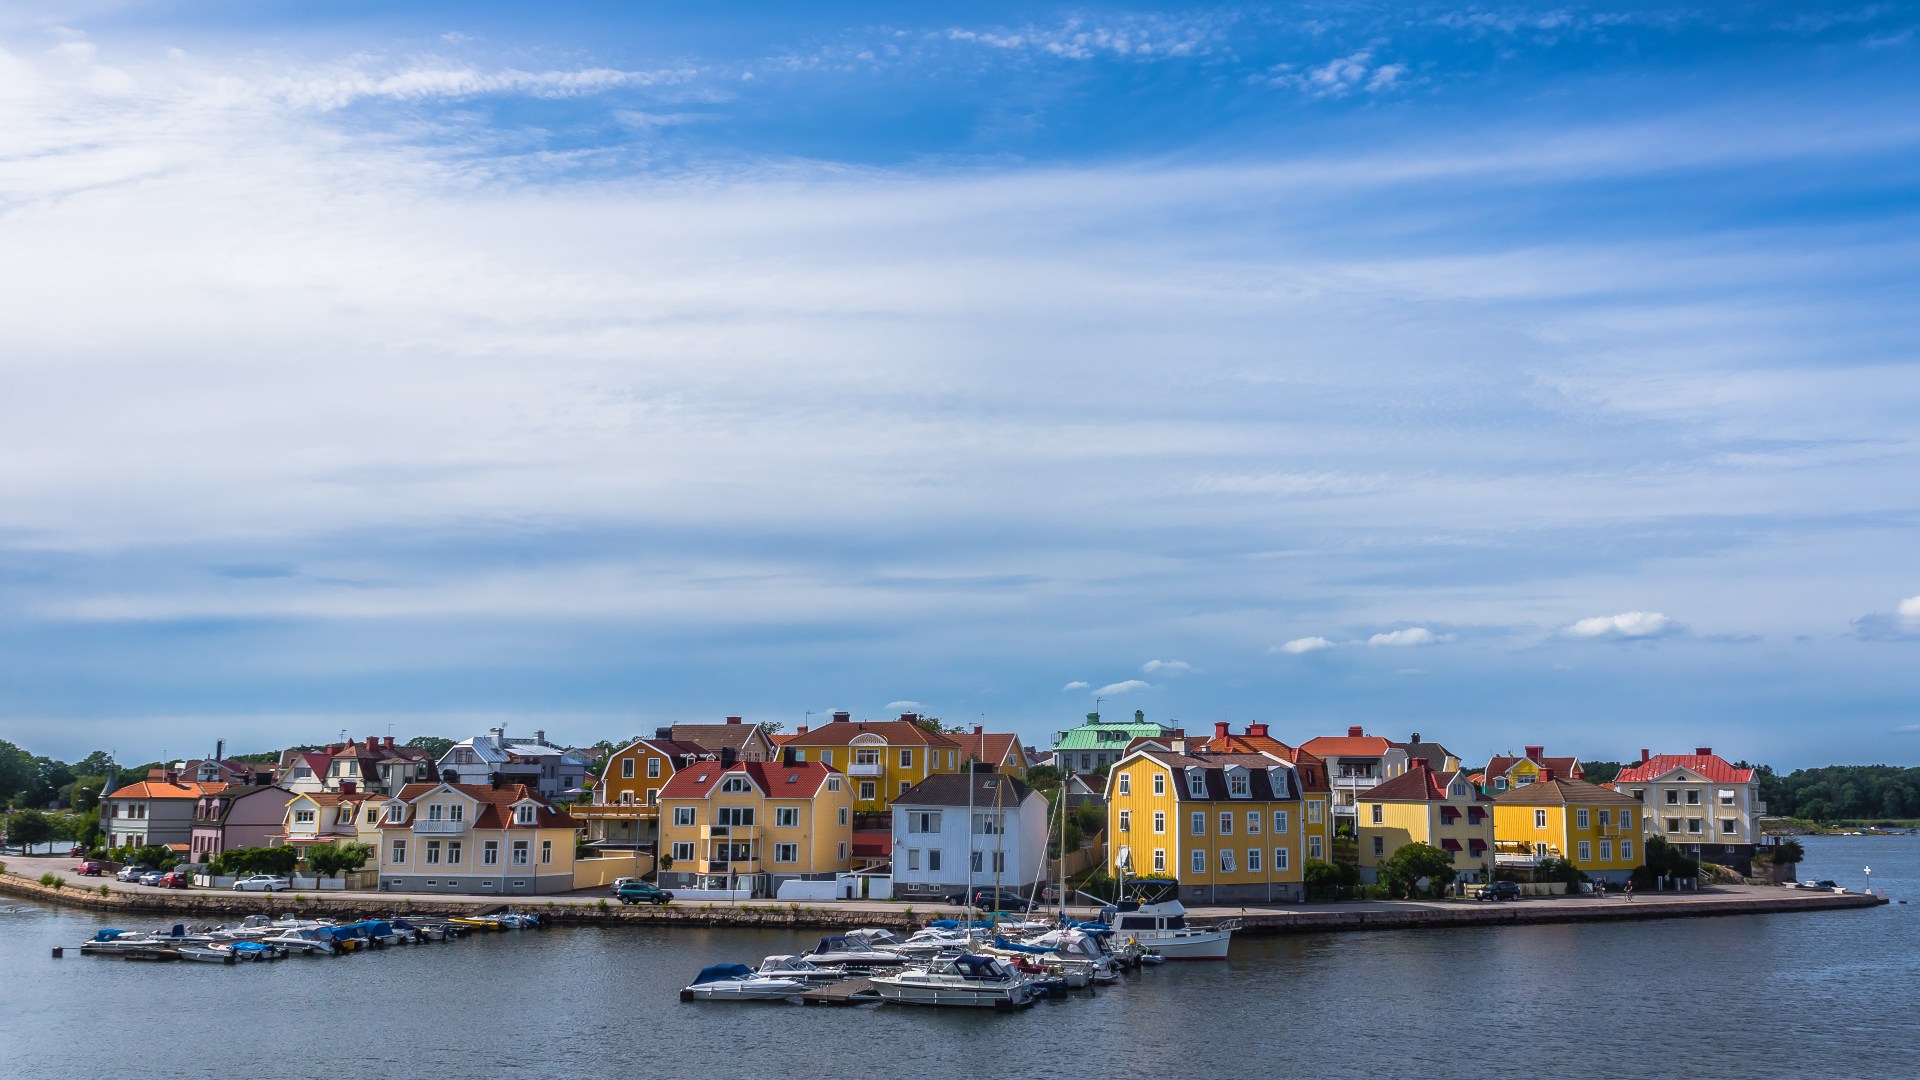 The waterfront of Karlskrona, southern Sweden